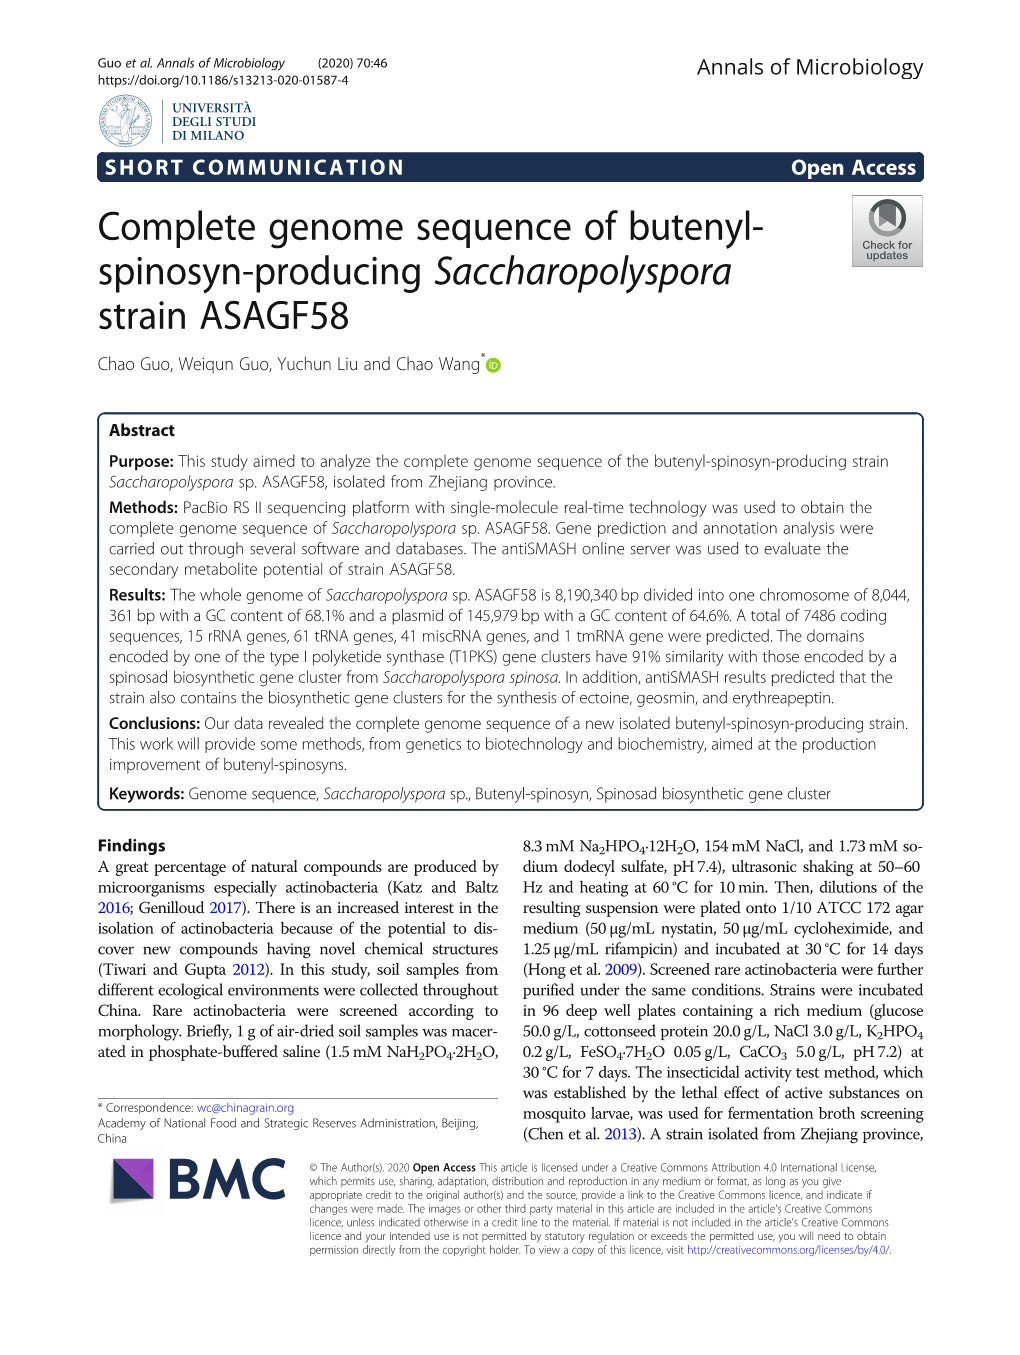 Complete Genome Sequence of Butenyl-Spinosyn-Producing